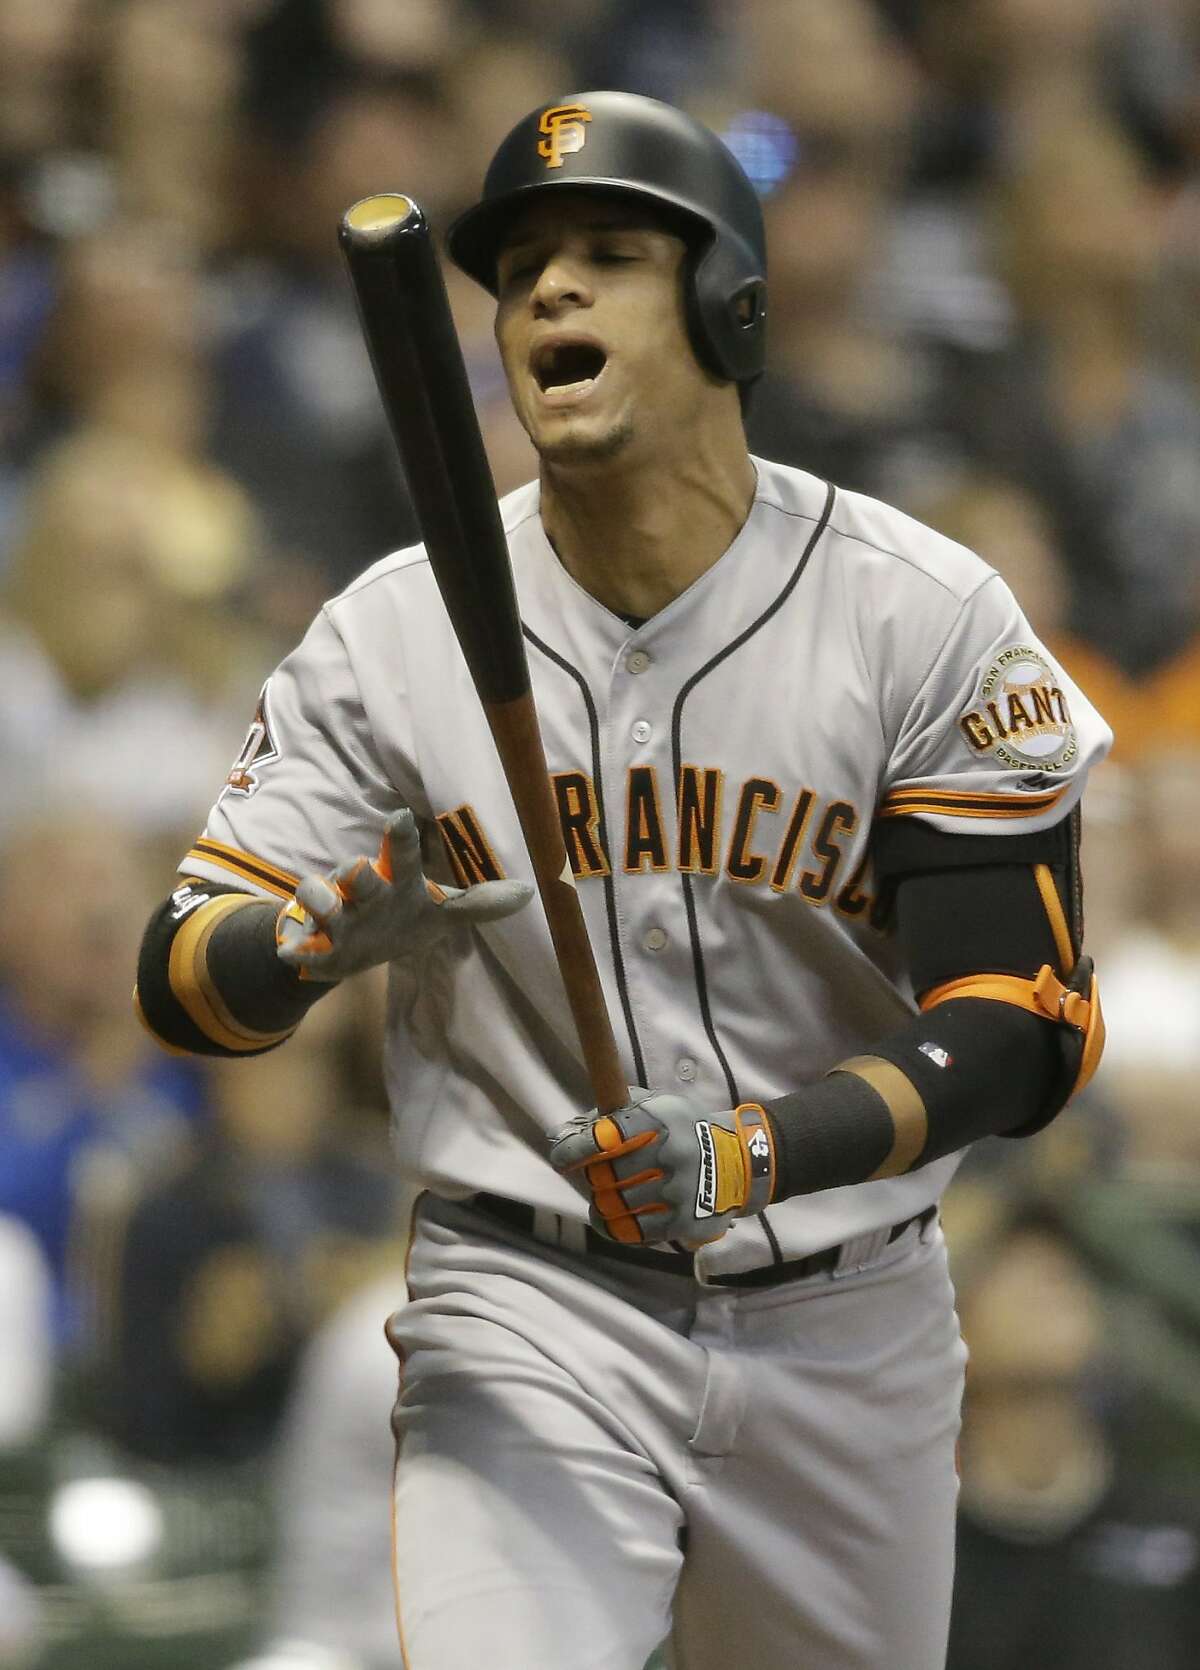 San Francisco Giants' Gorkys Hernandez reacts after popping out in the infield against the Milwaukee Brewers during the fifth inning of a baseball game, Saturday, Sept. 8, 2018, in Milwaukee. (AP Photo/Jeffrey Phelps)